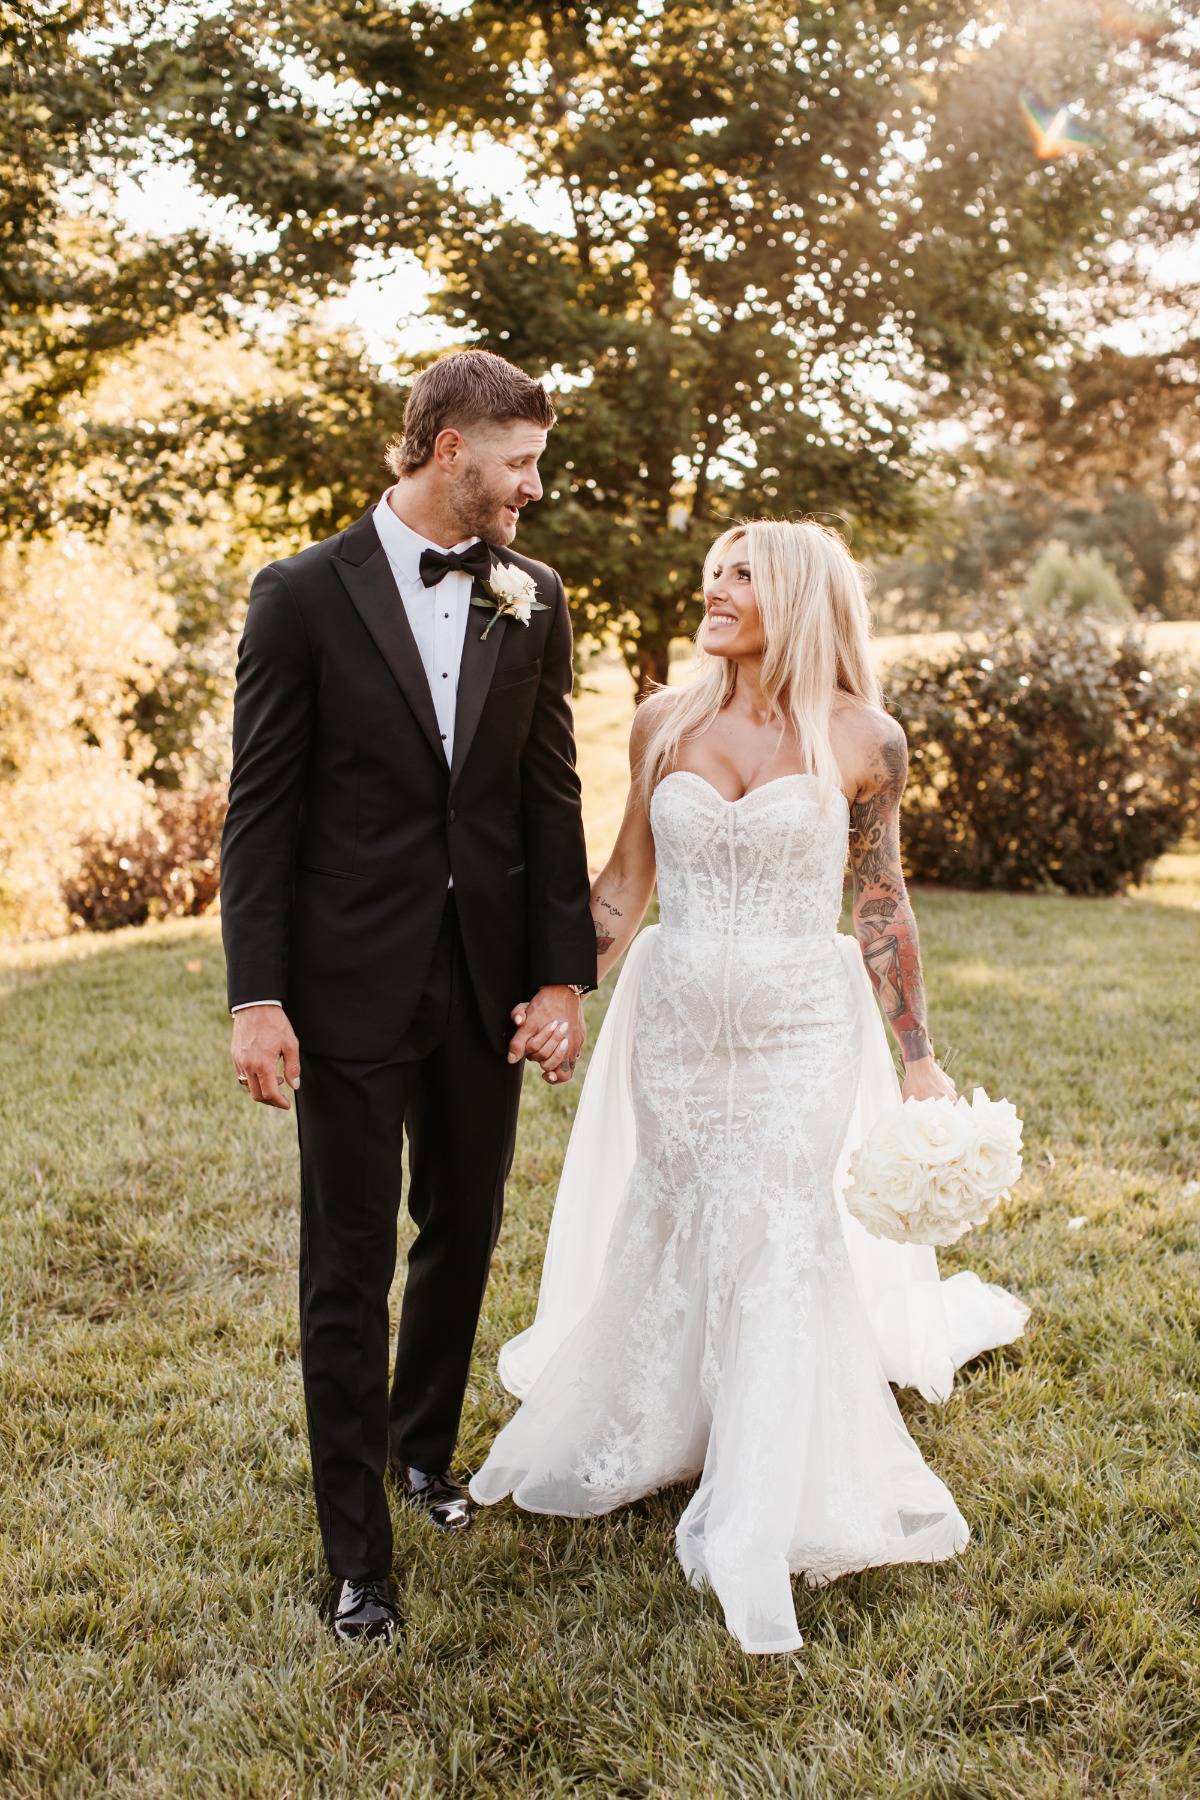 Austin Watson and wife's second dress look